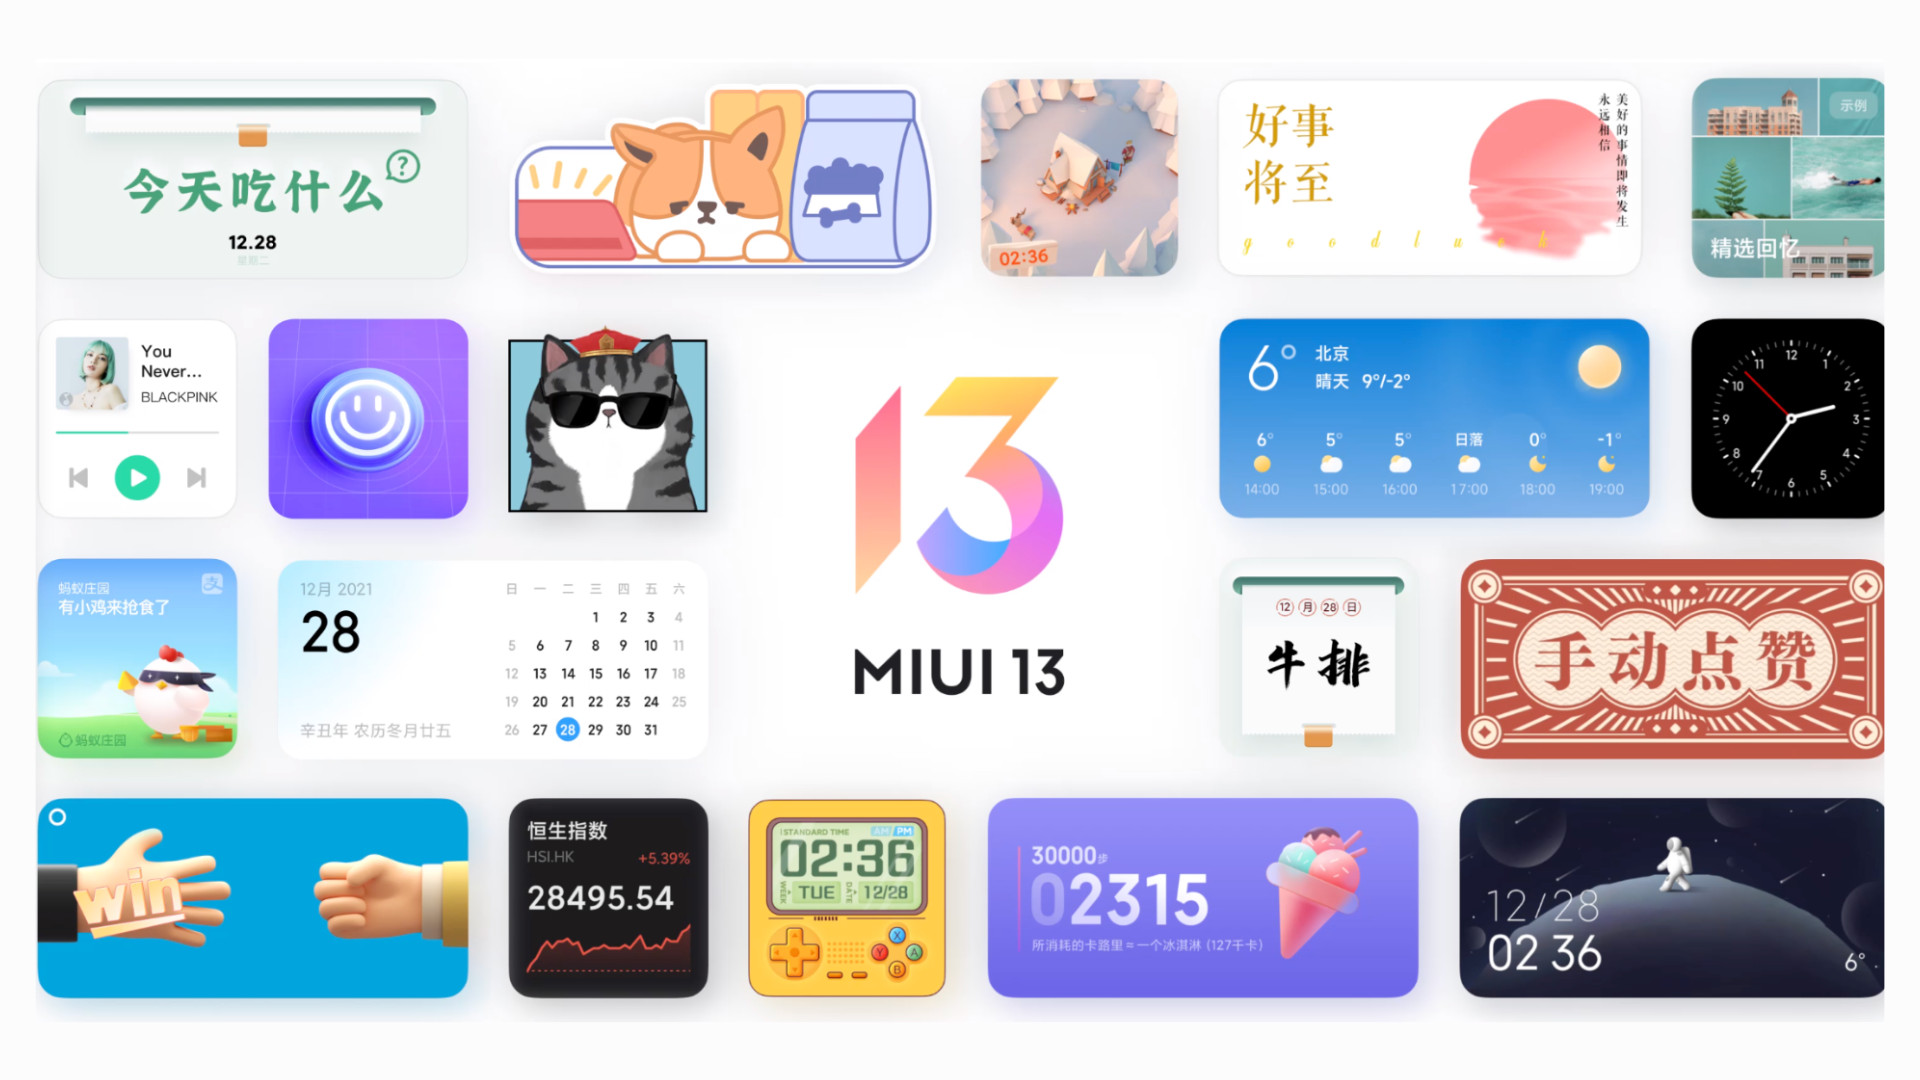 Xiaomi has added Pure Mode to MIUI - what does it mean